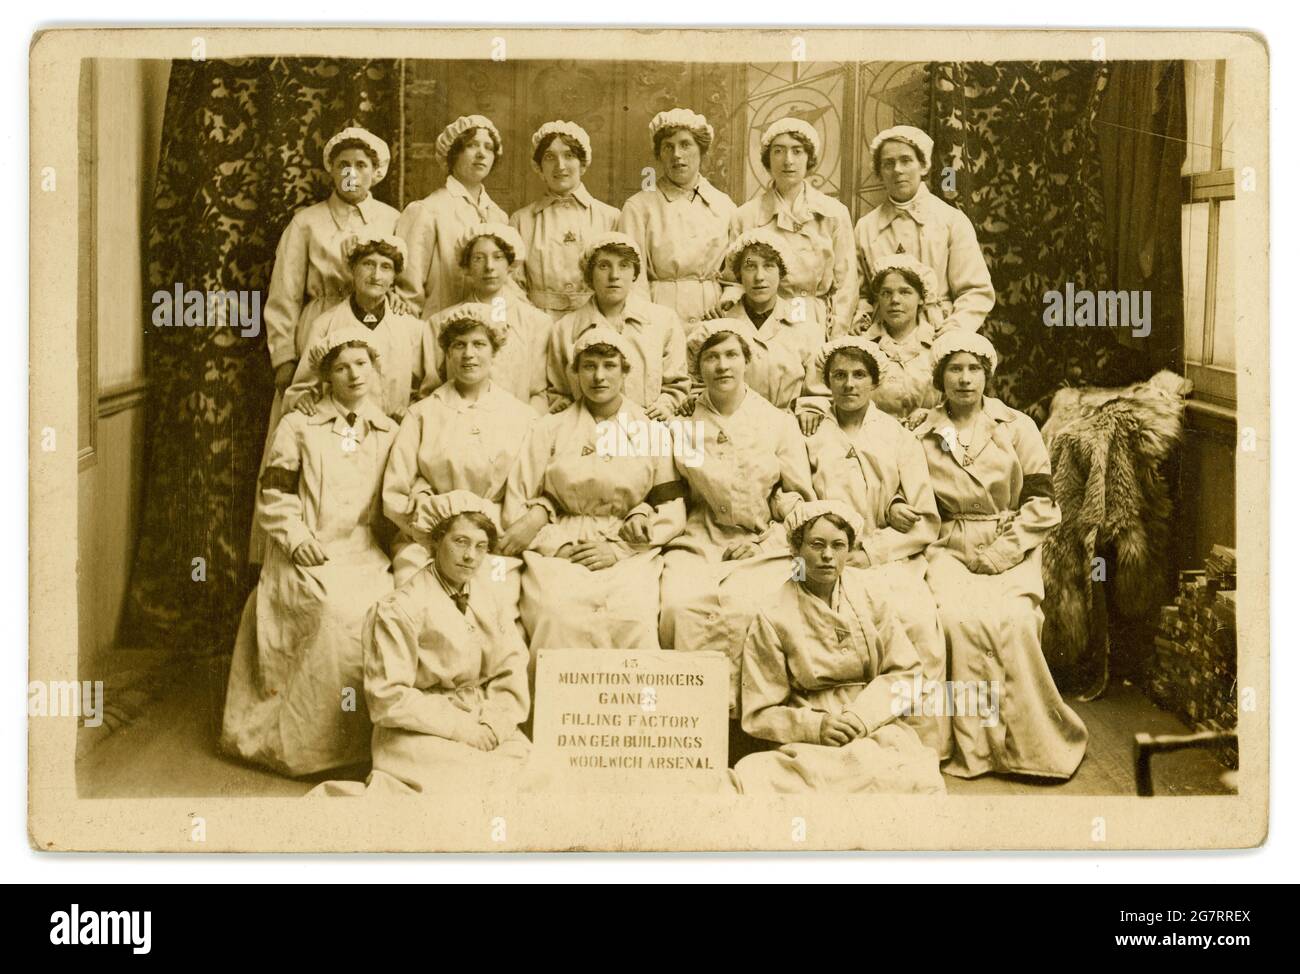 Original WW1 era postcard notice reads Munition Workers Gaines Filling Factory Danger Buildings Woolwich Arsenal, the women wear 'on war service' badges posted 1917, Woolwich, London, U.K. Stock Photo